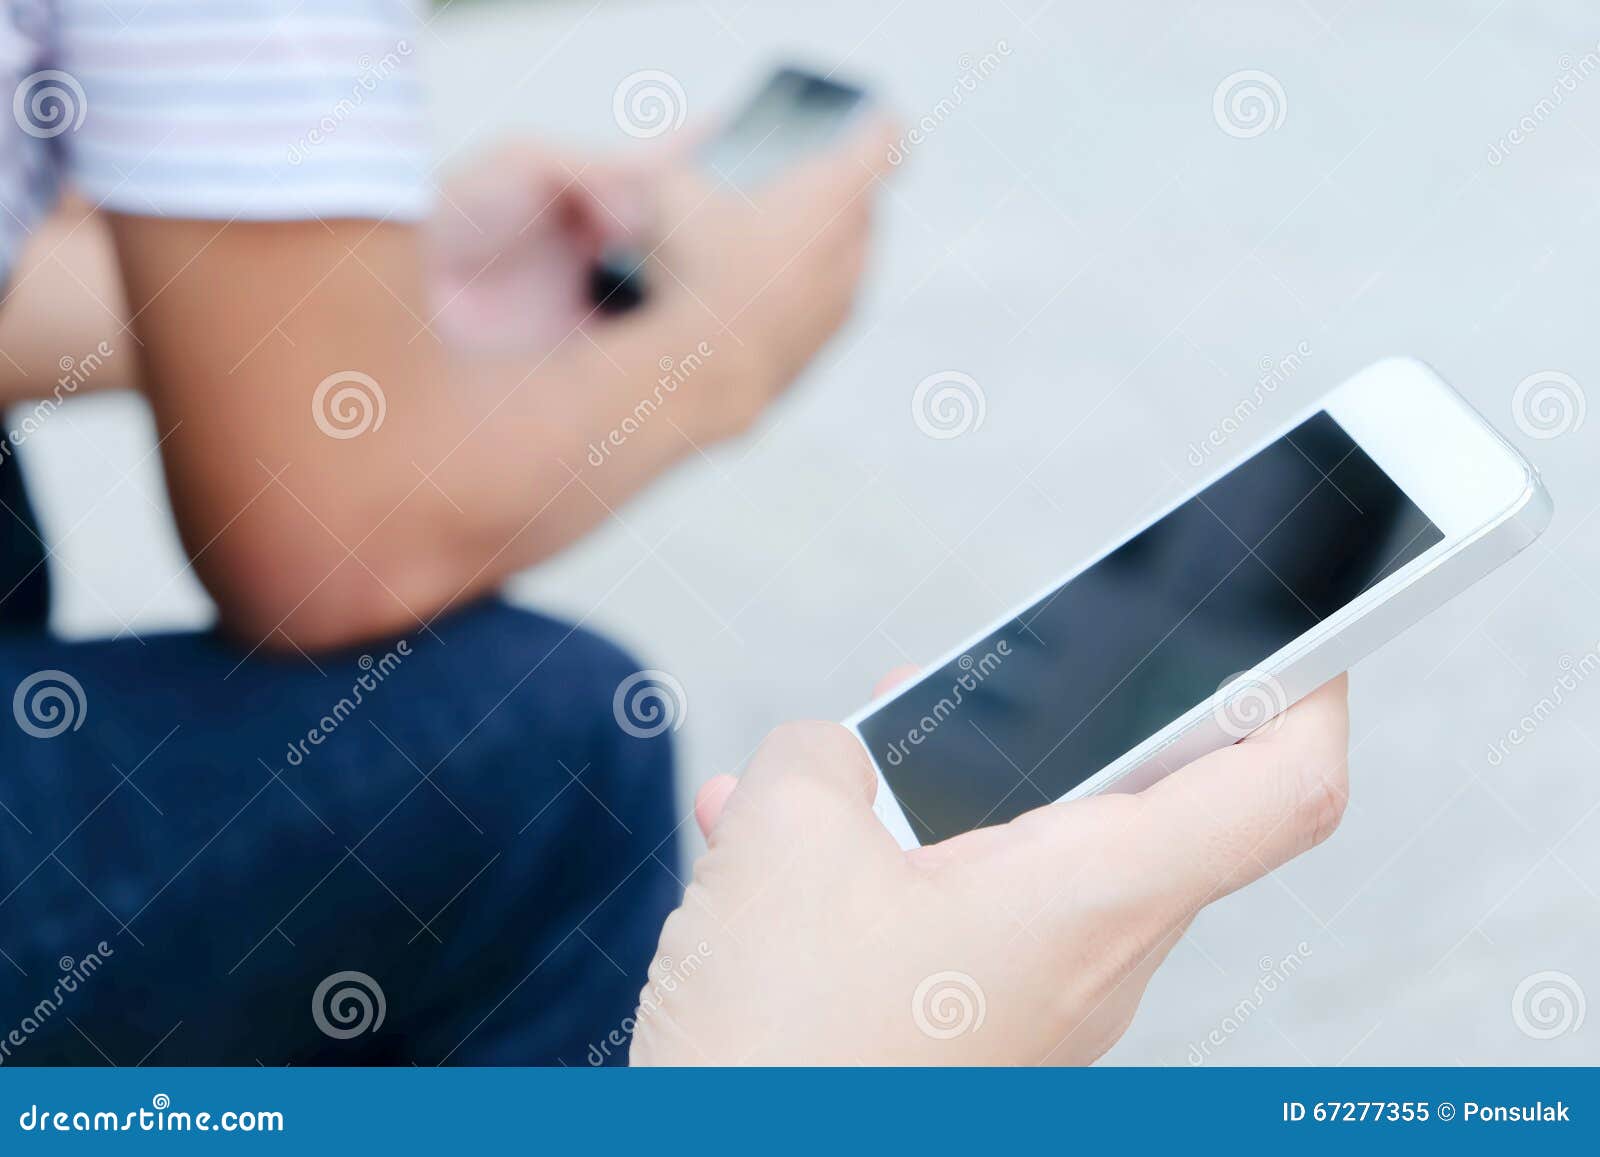 People using Smart Phone stock image. Image of culture - 67277355